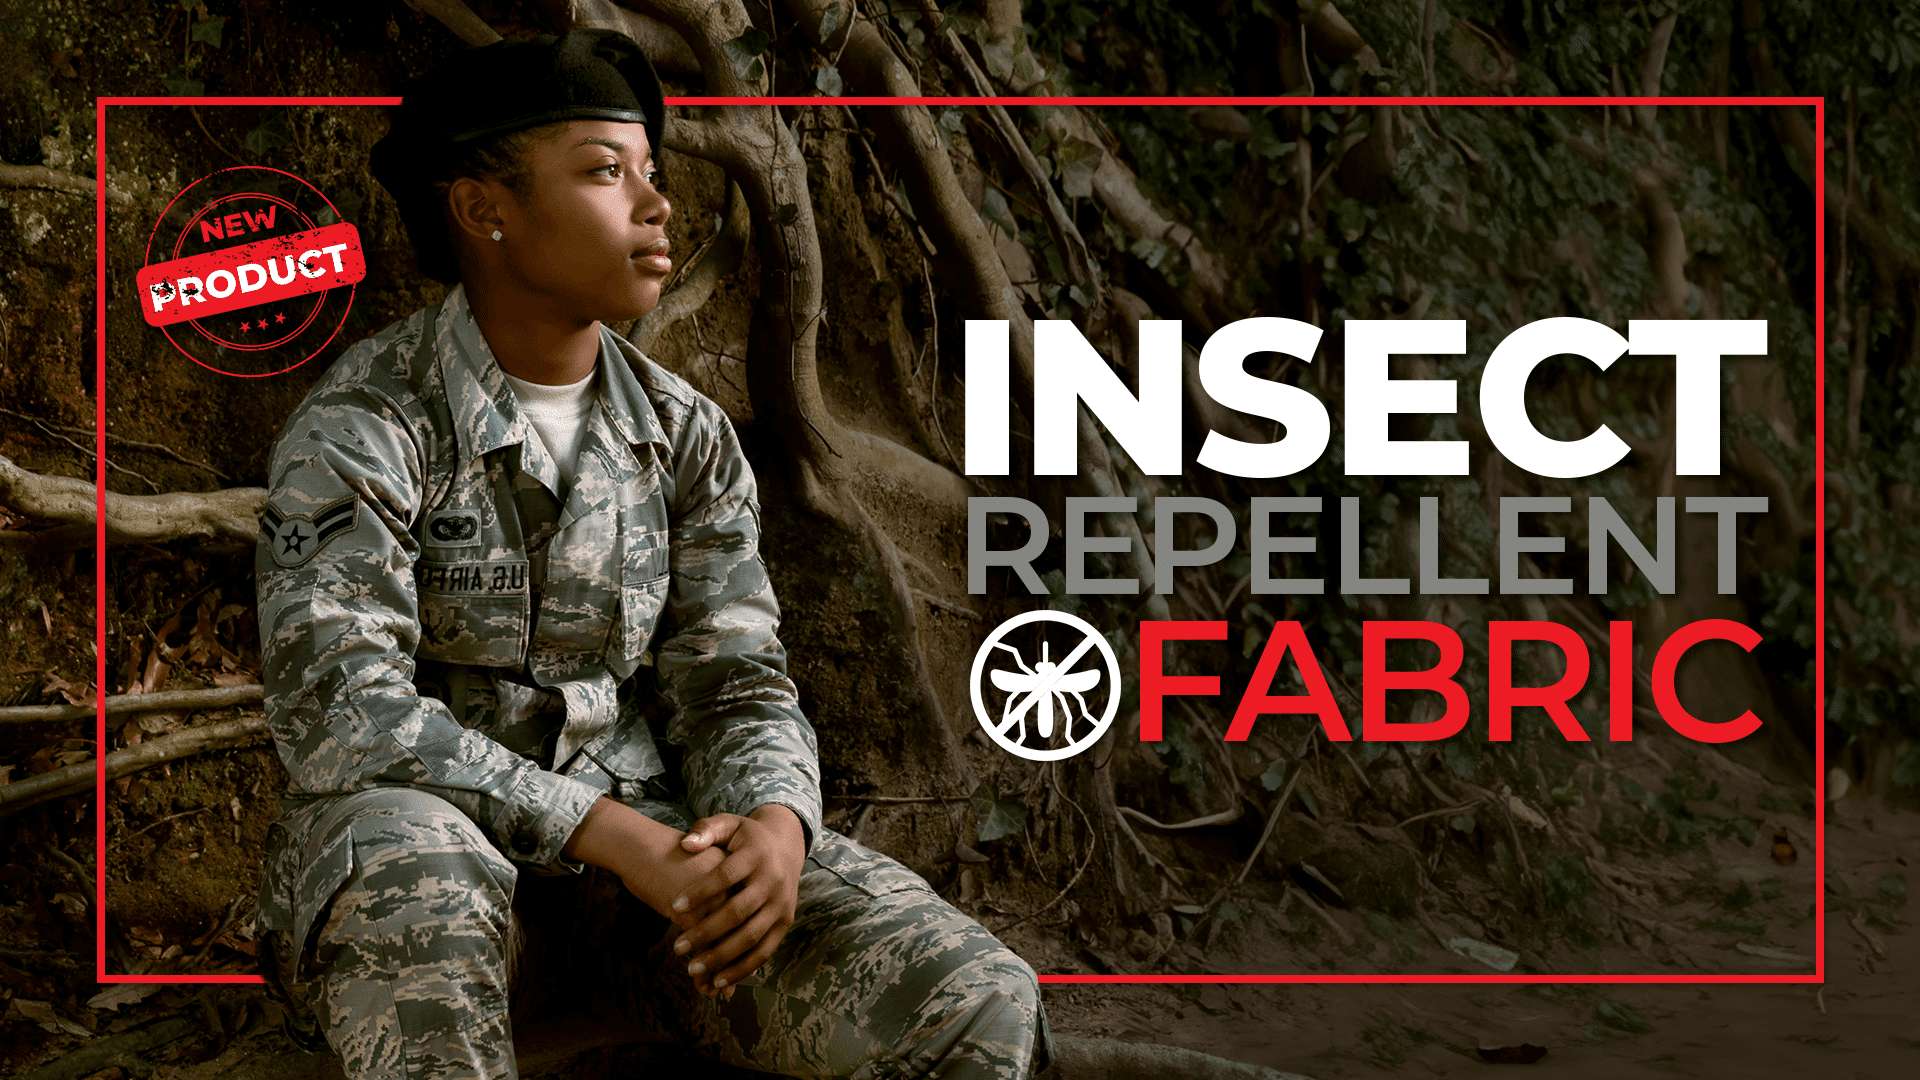 Raff Military Textile Starts a New Era with Fireproof and Insect Repellent Uniform! 